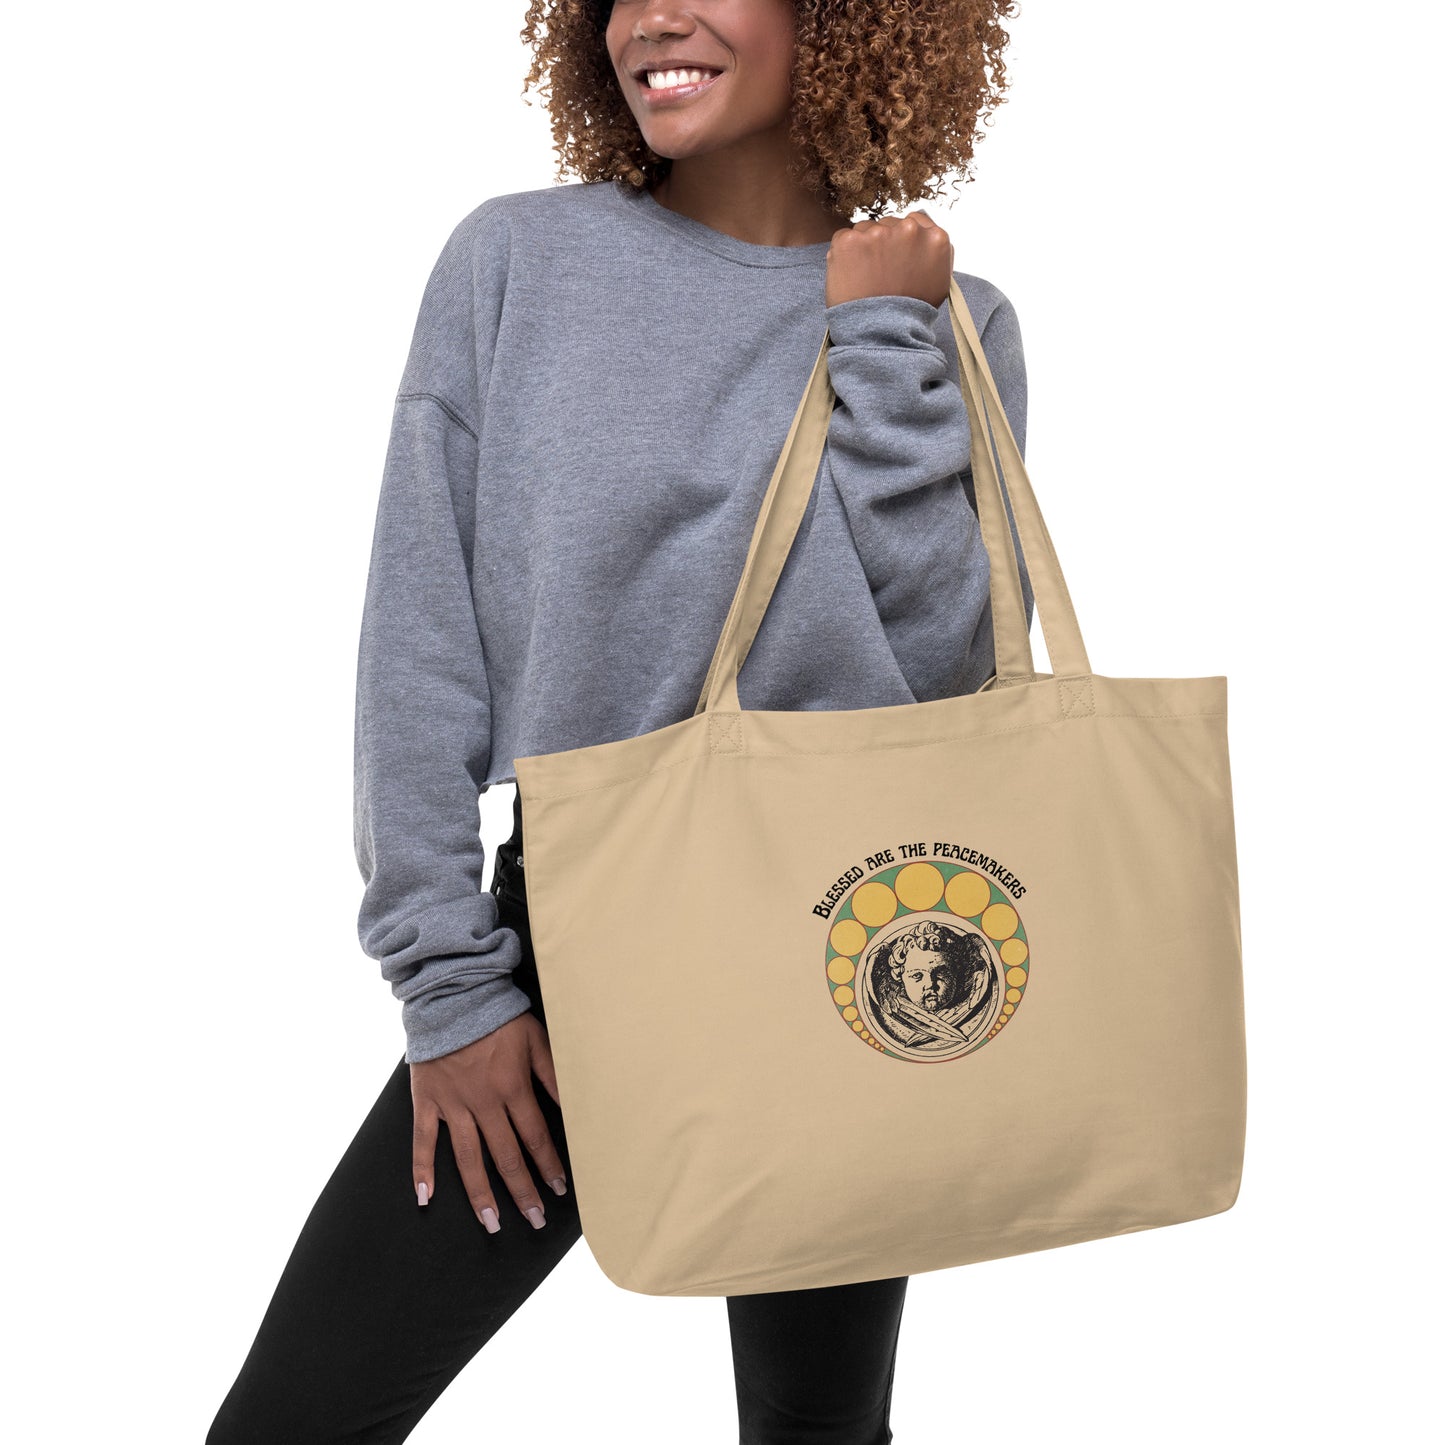 Blessed Are The Peacemakers organic tote bag